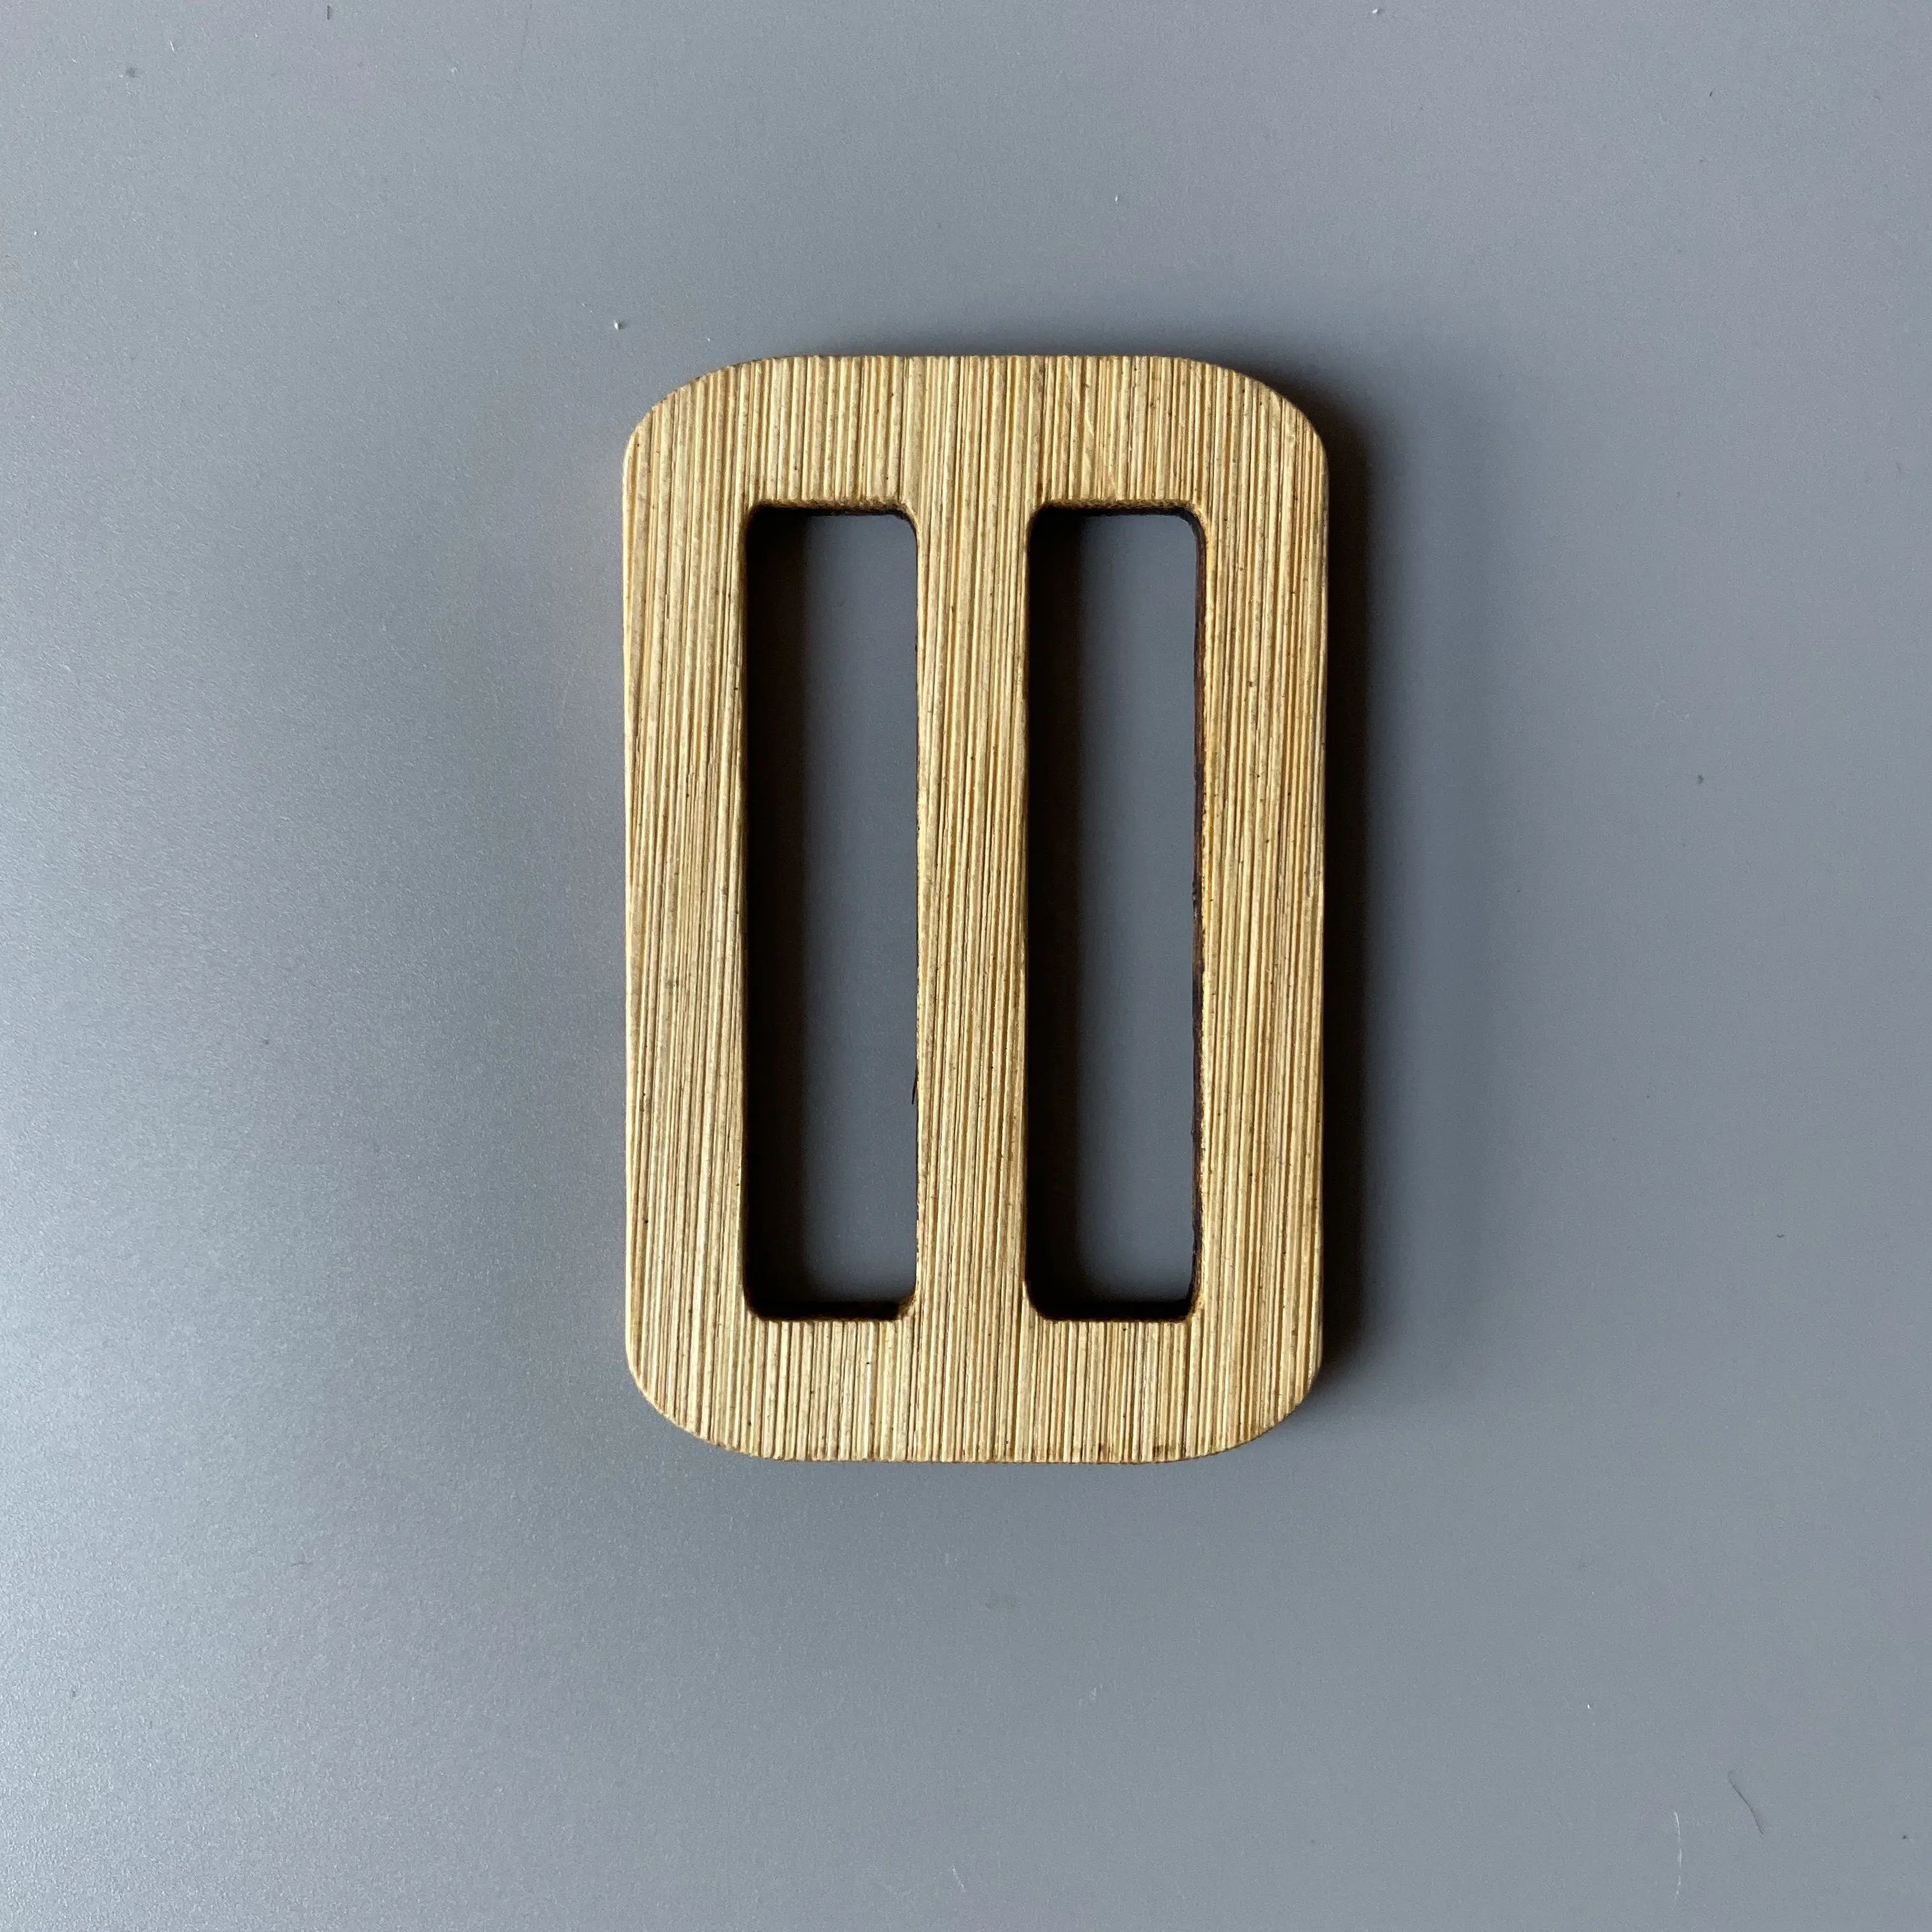 6cm rectangle wooden buckle in recycle style